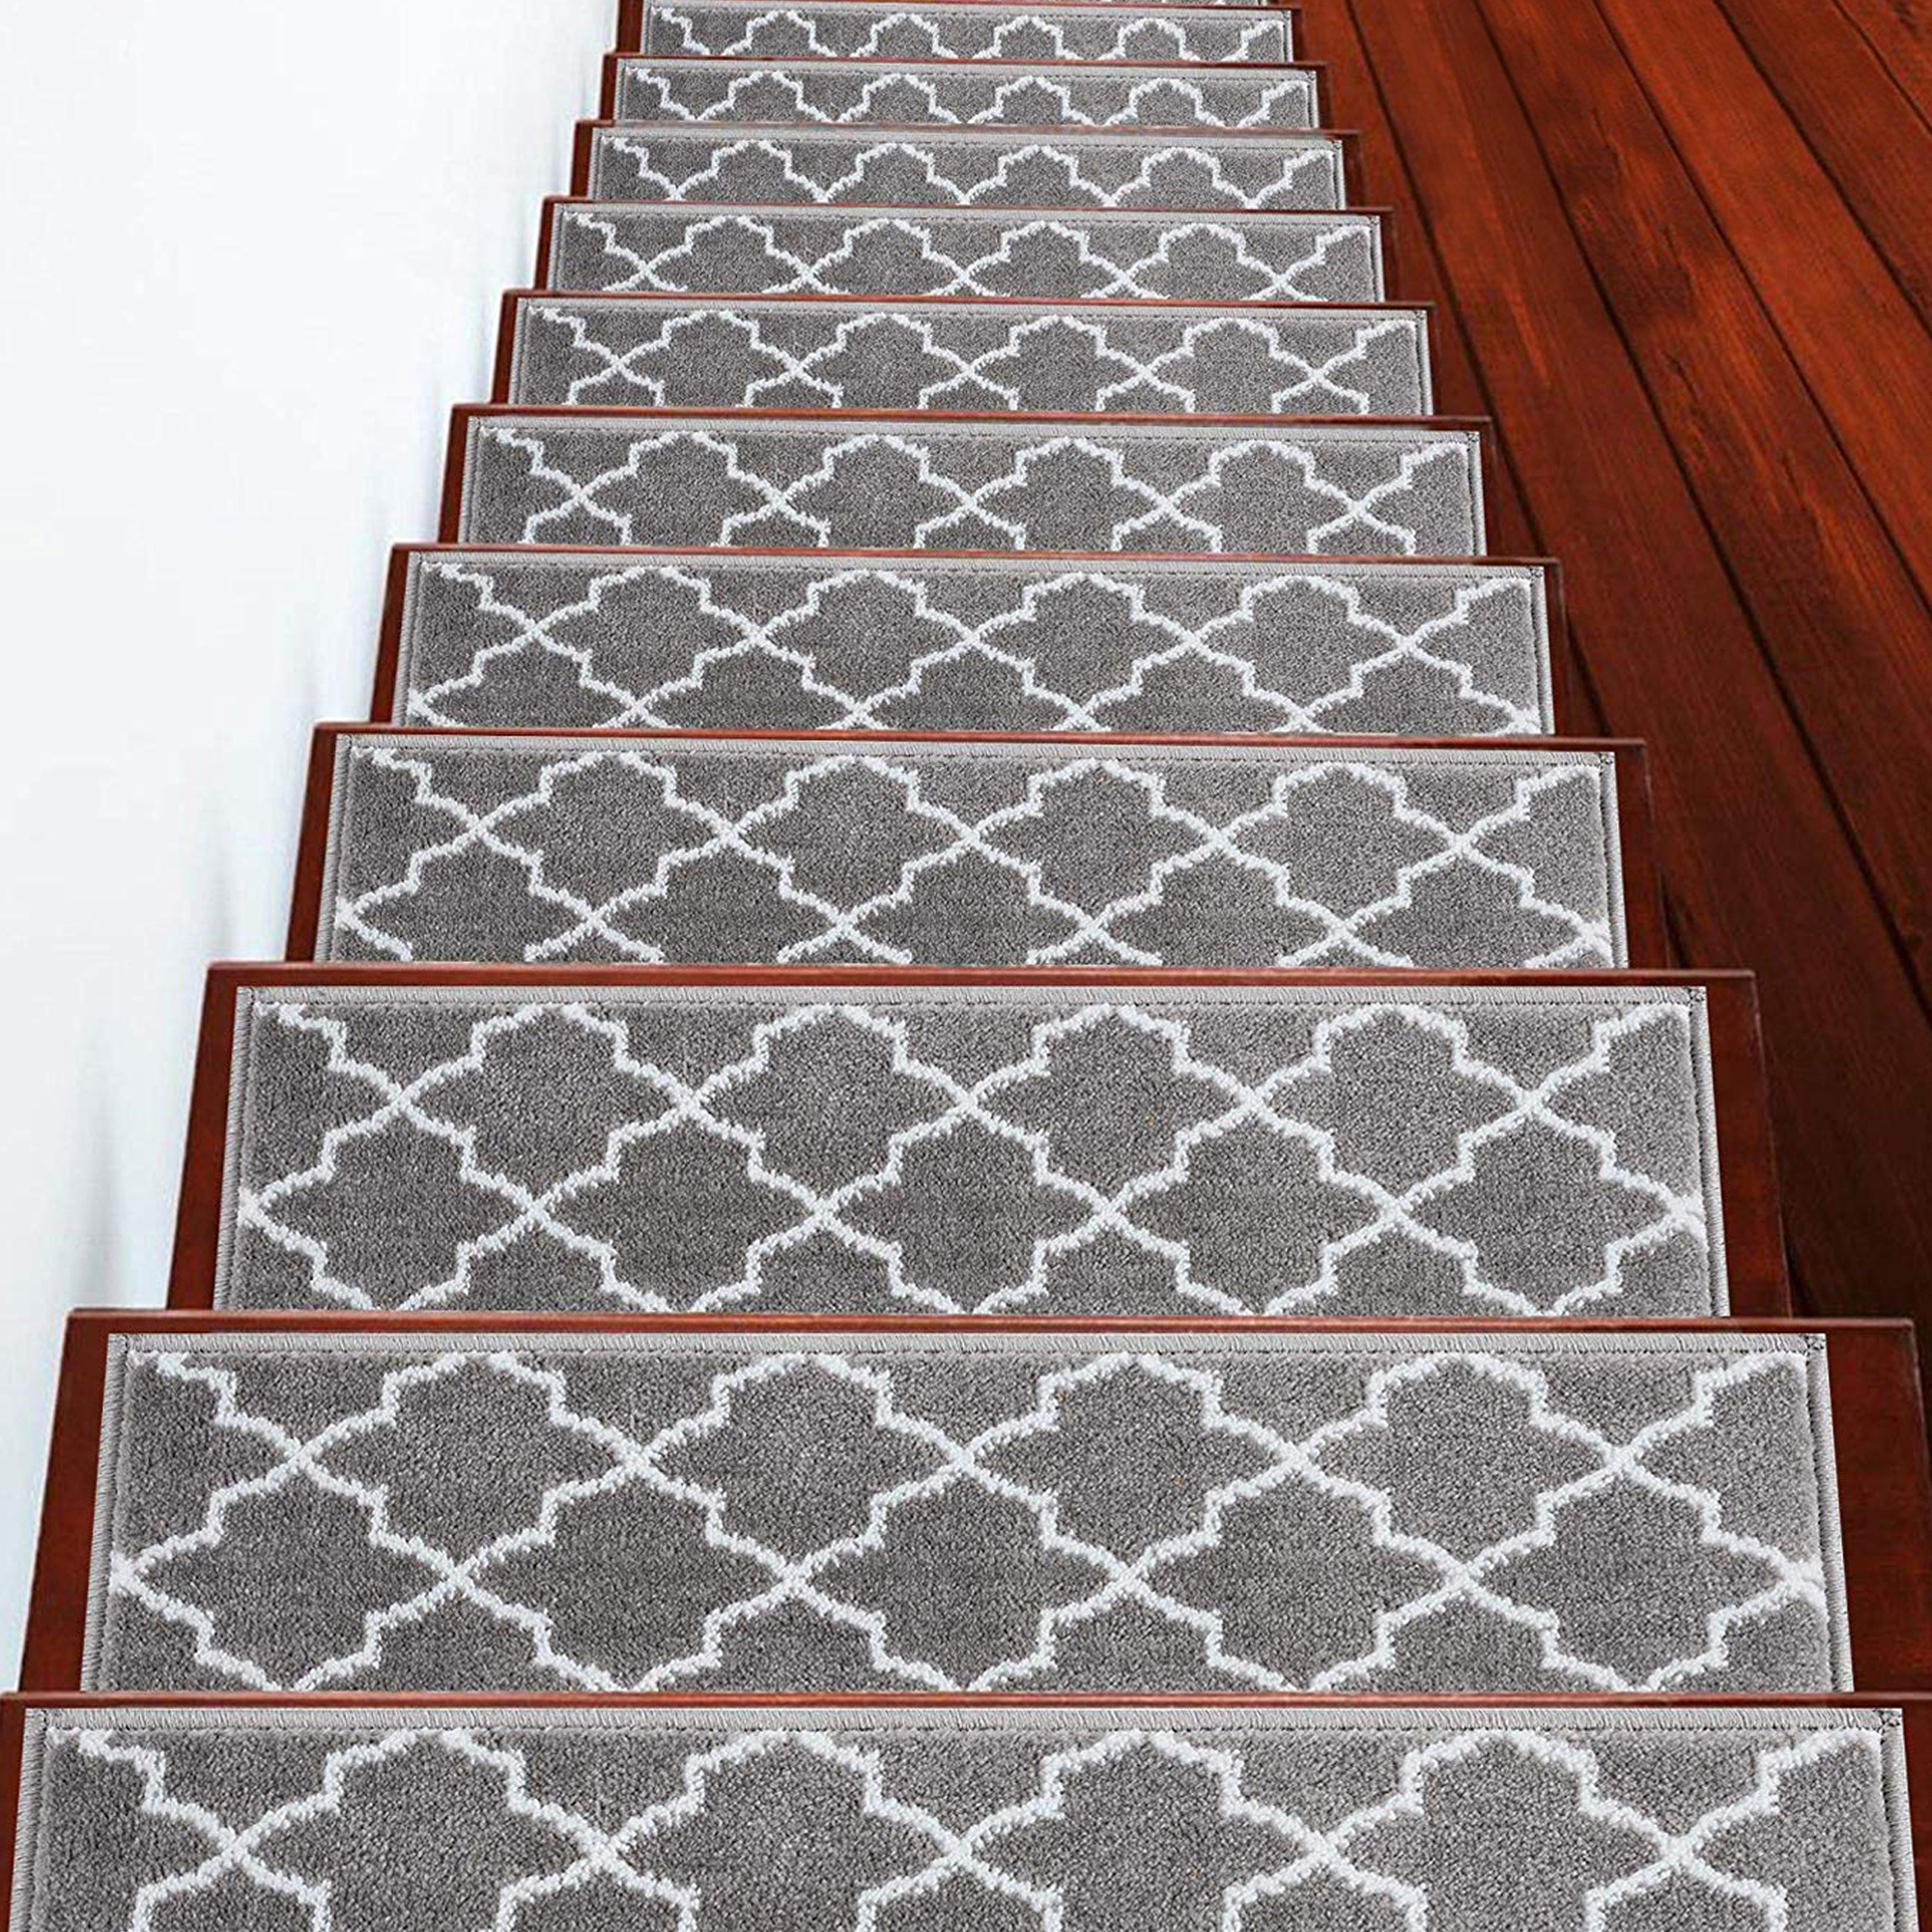 How to Pick Out a Stair Runner